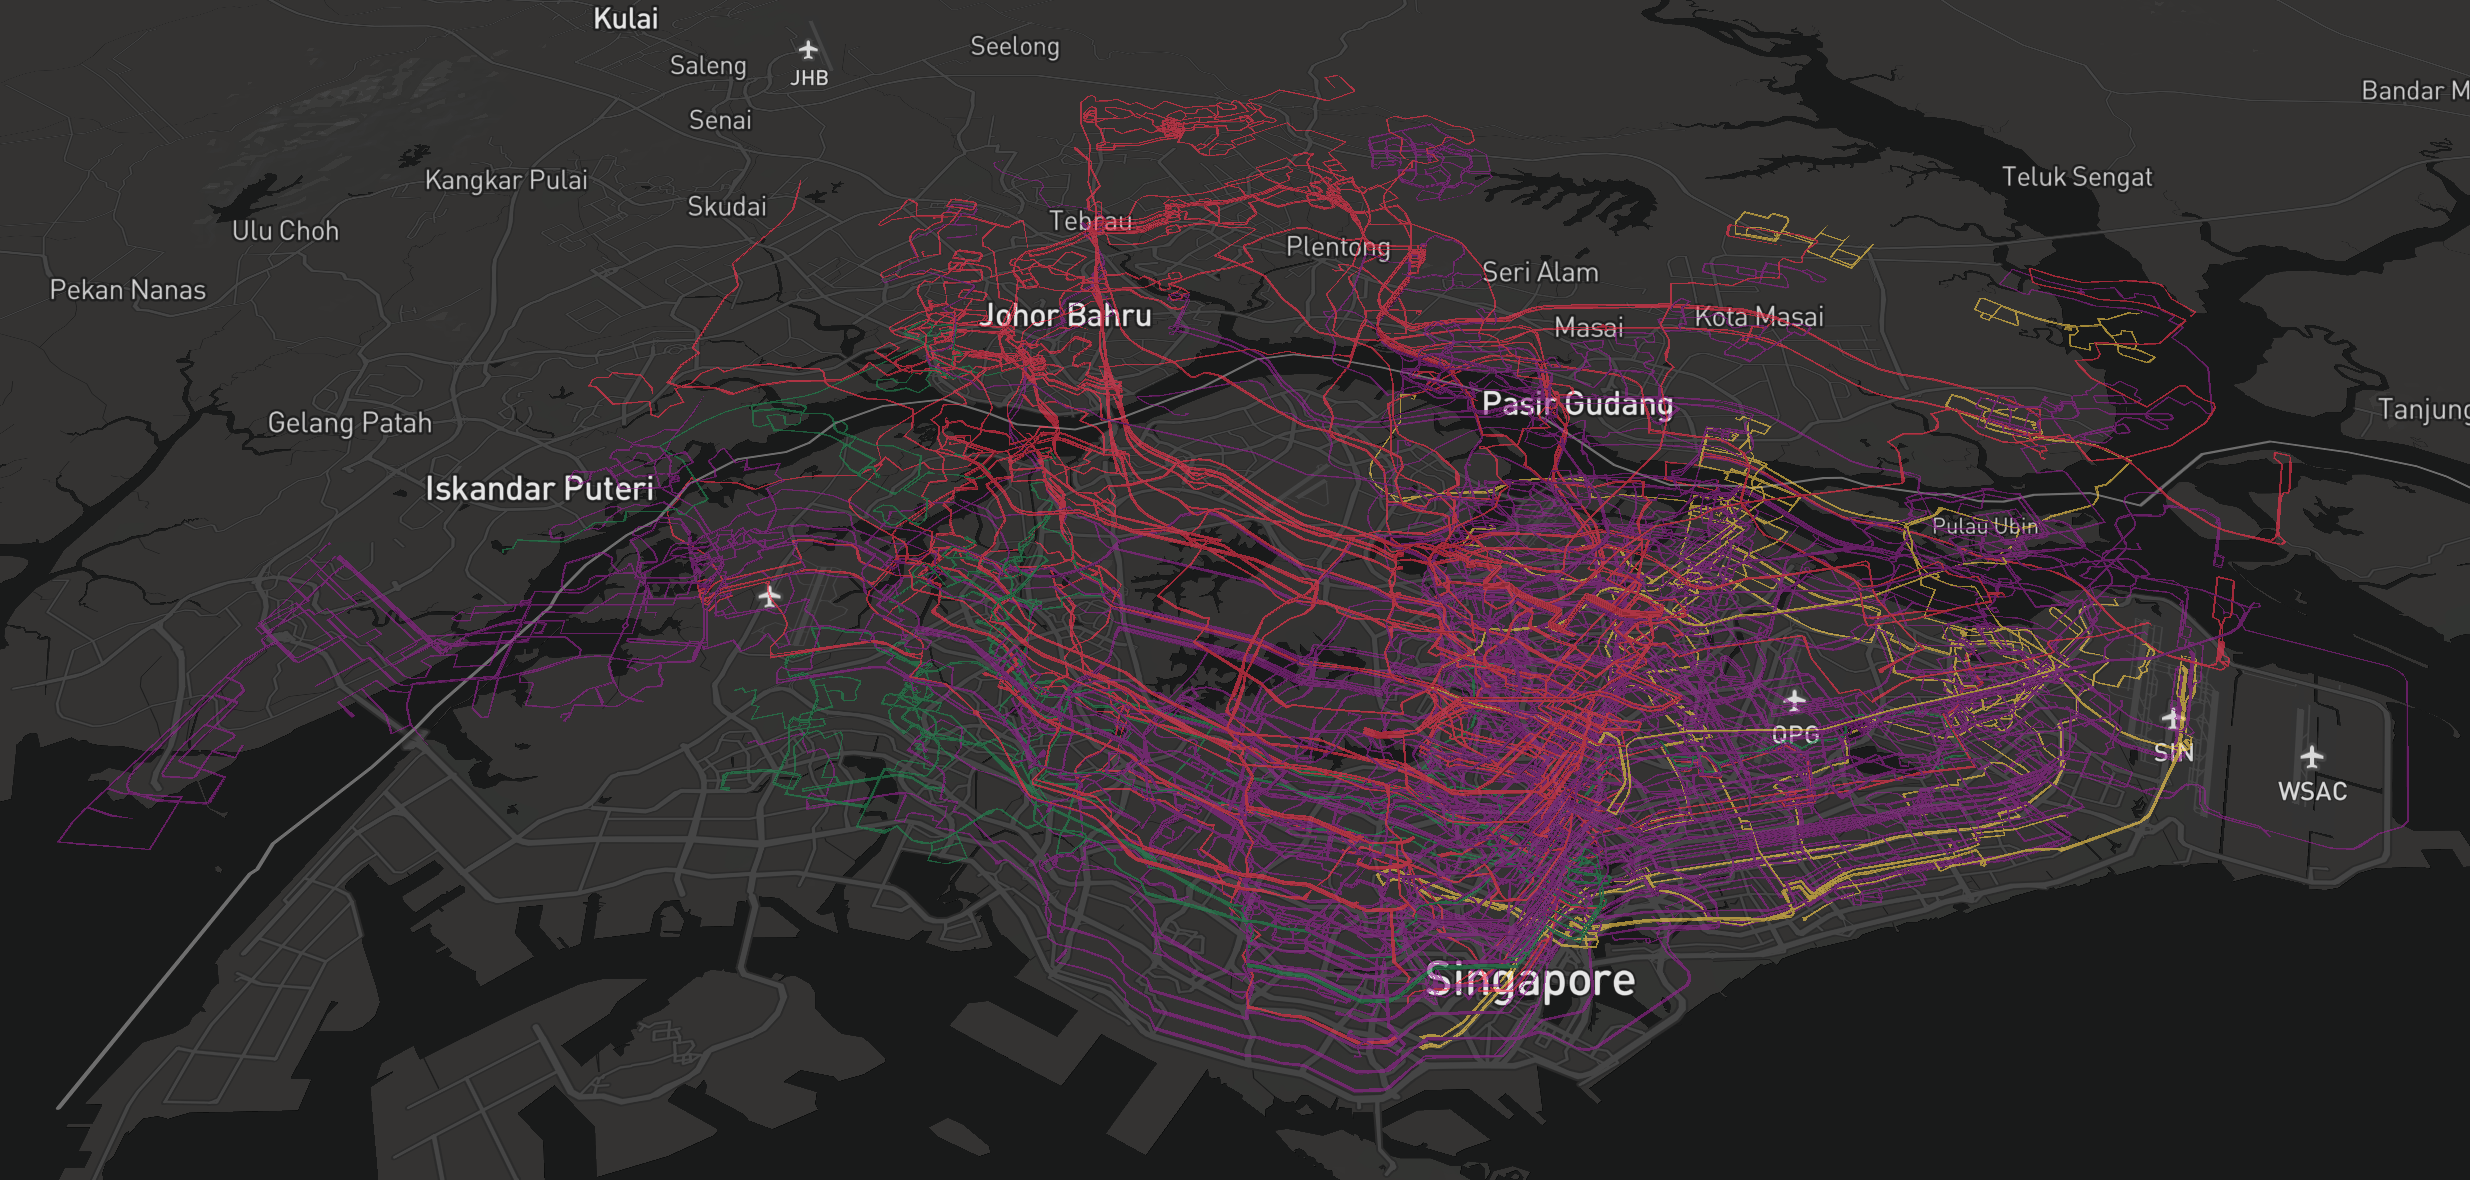 BusRouter SG visualization, showing all route lines floating on each other